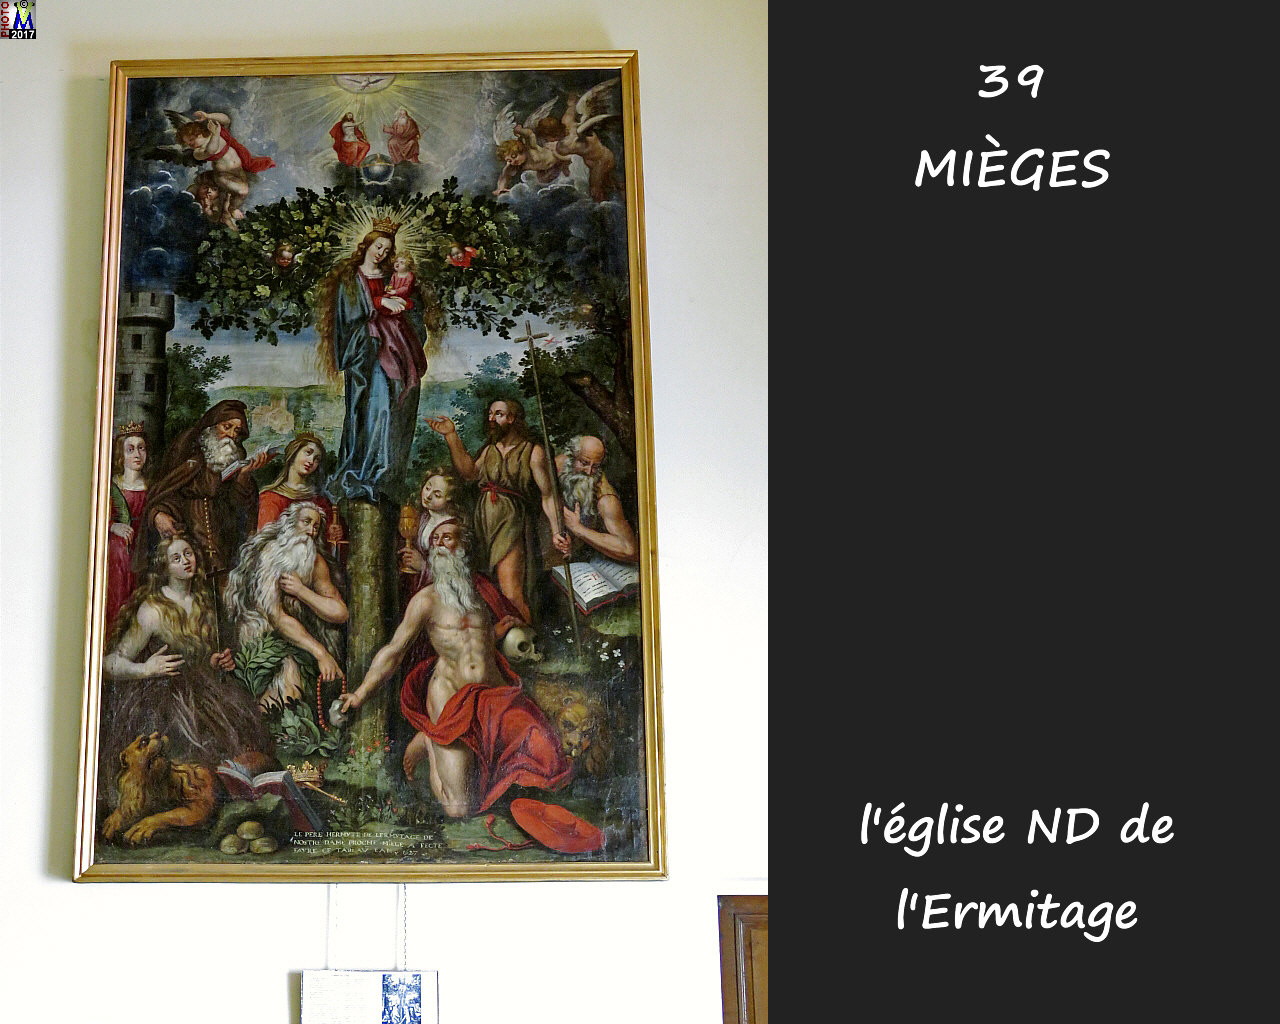 39MIEGES_Ermitage_132.jpg